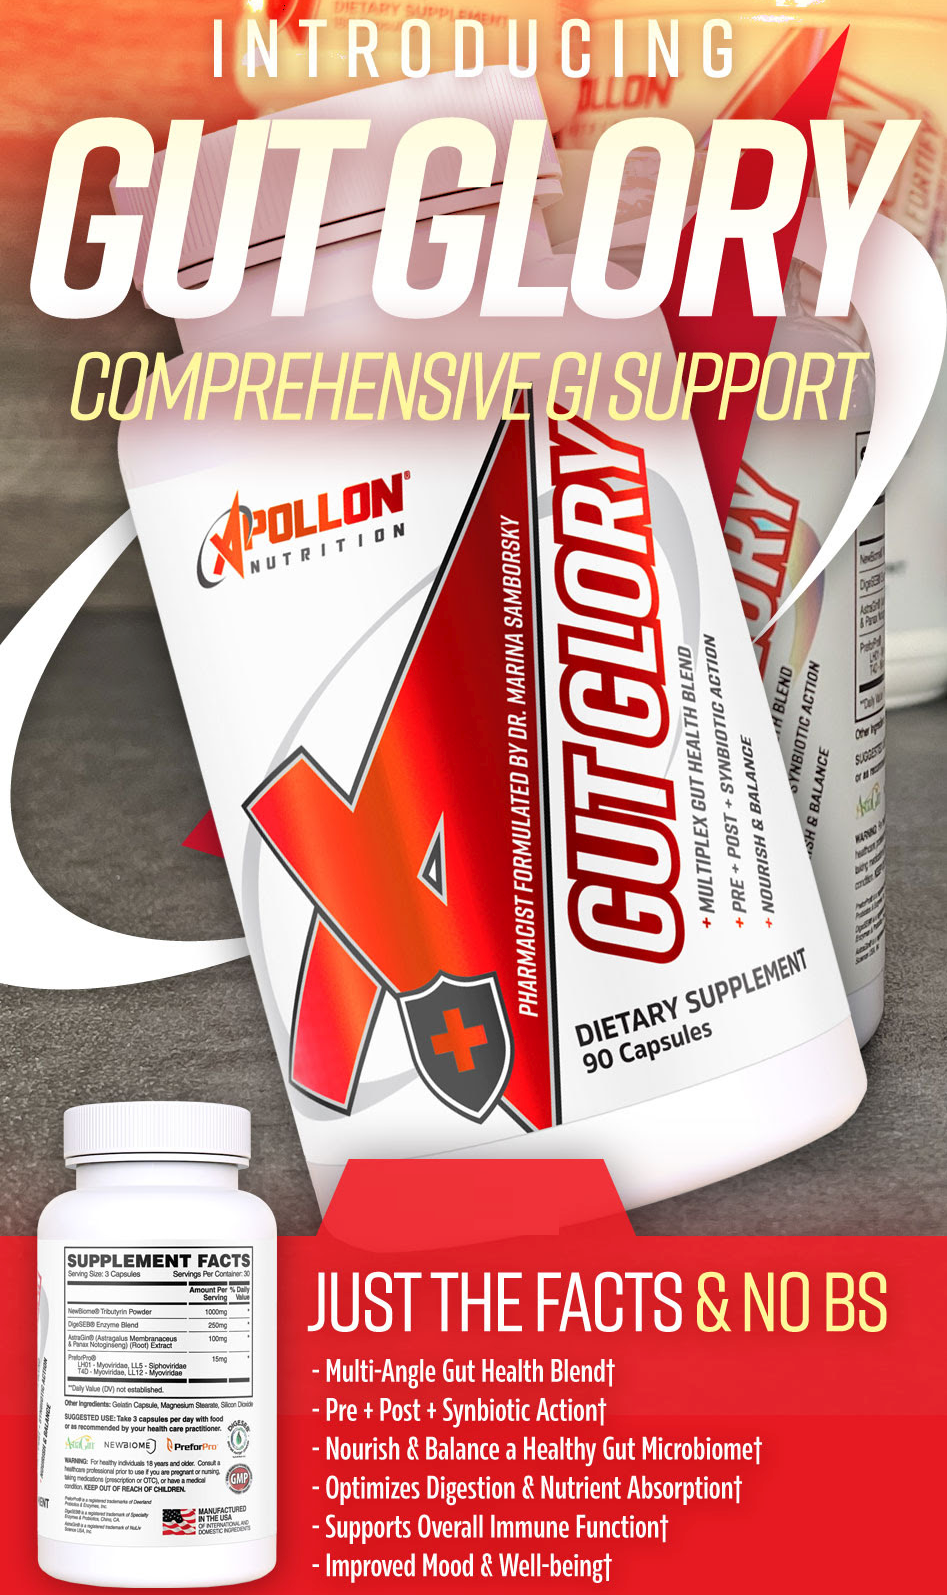 Ollon Gut Glory GI Support Supplement: 90-capsule blend for optimizing digestion, supporting immune function, improving mood and well-being.